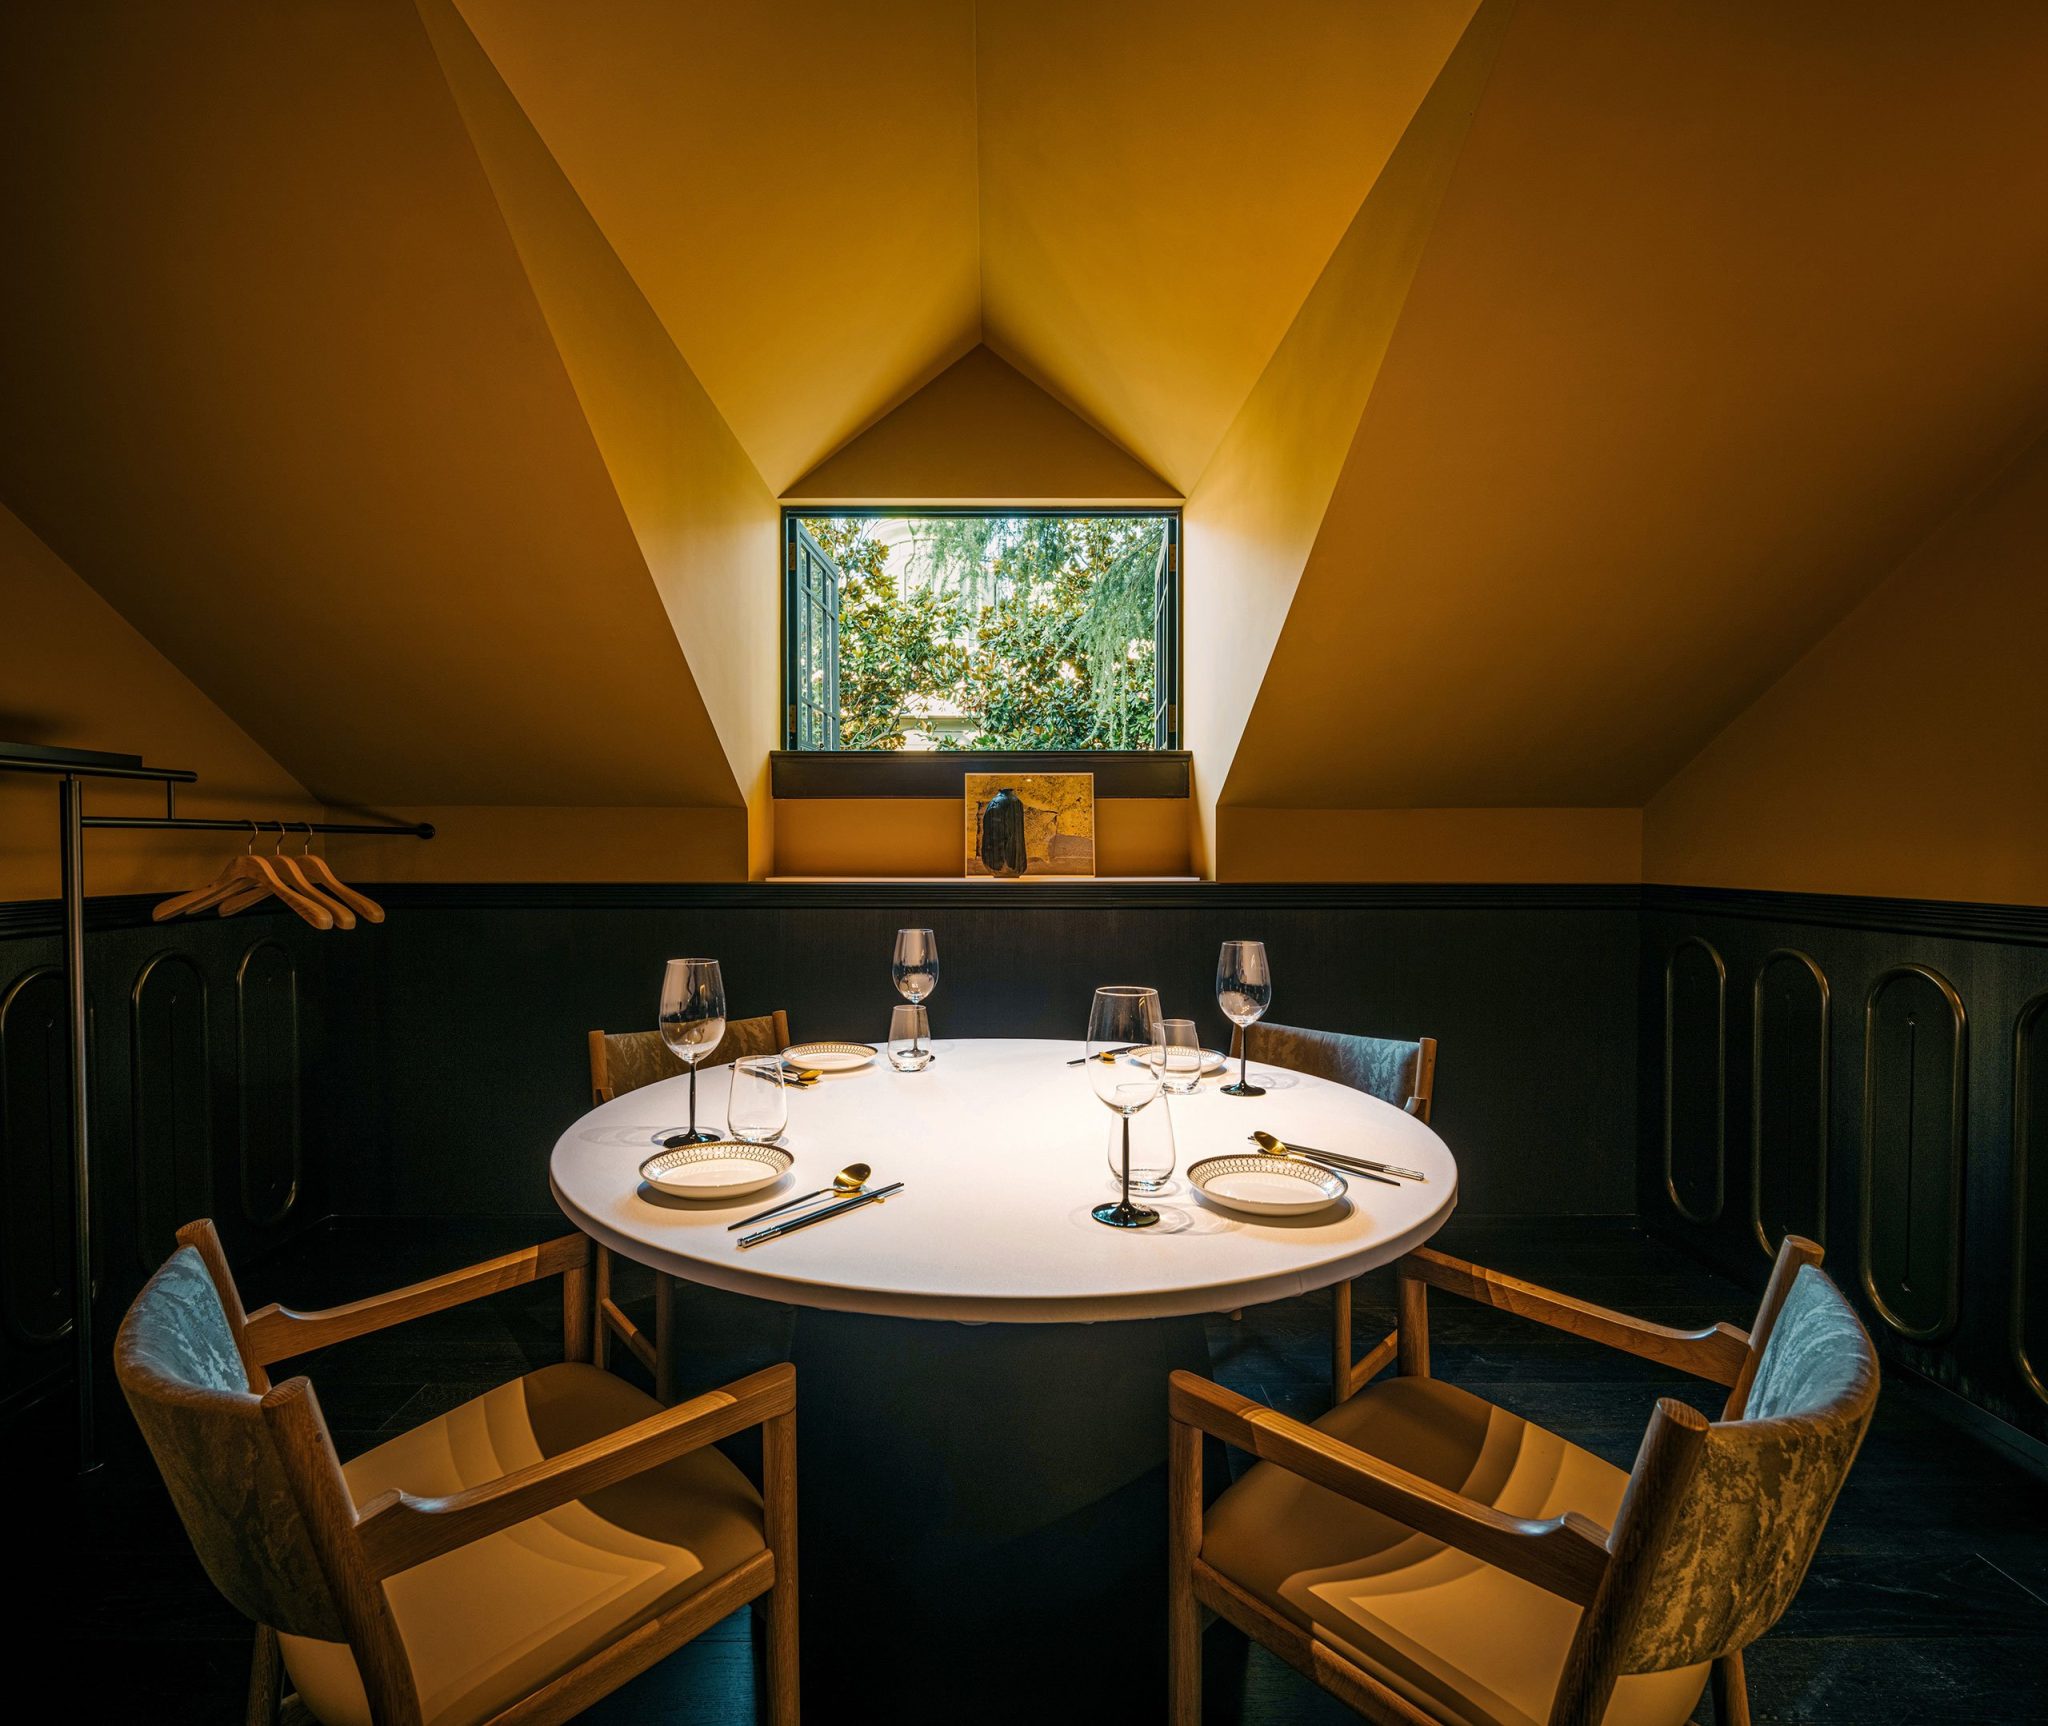 A small and intimate dining room in the attic